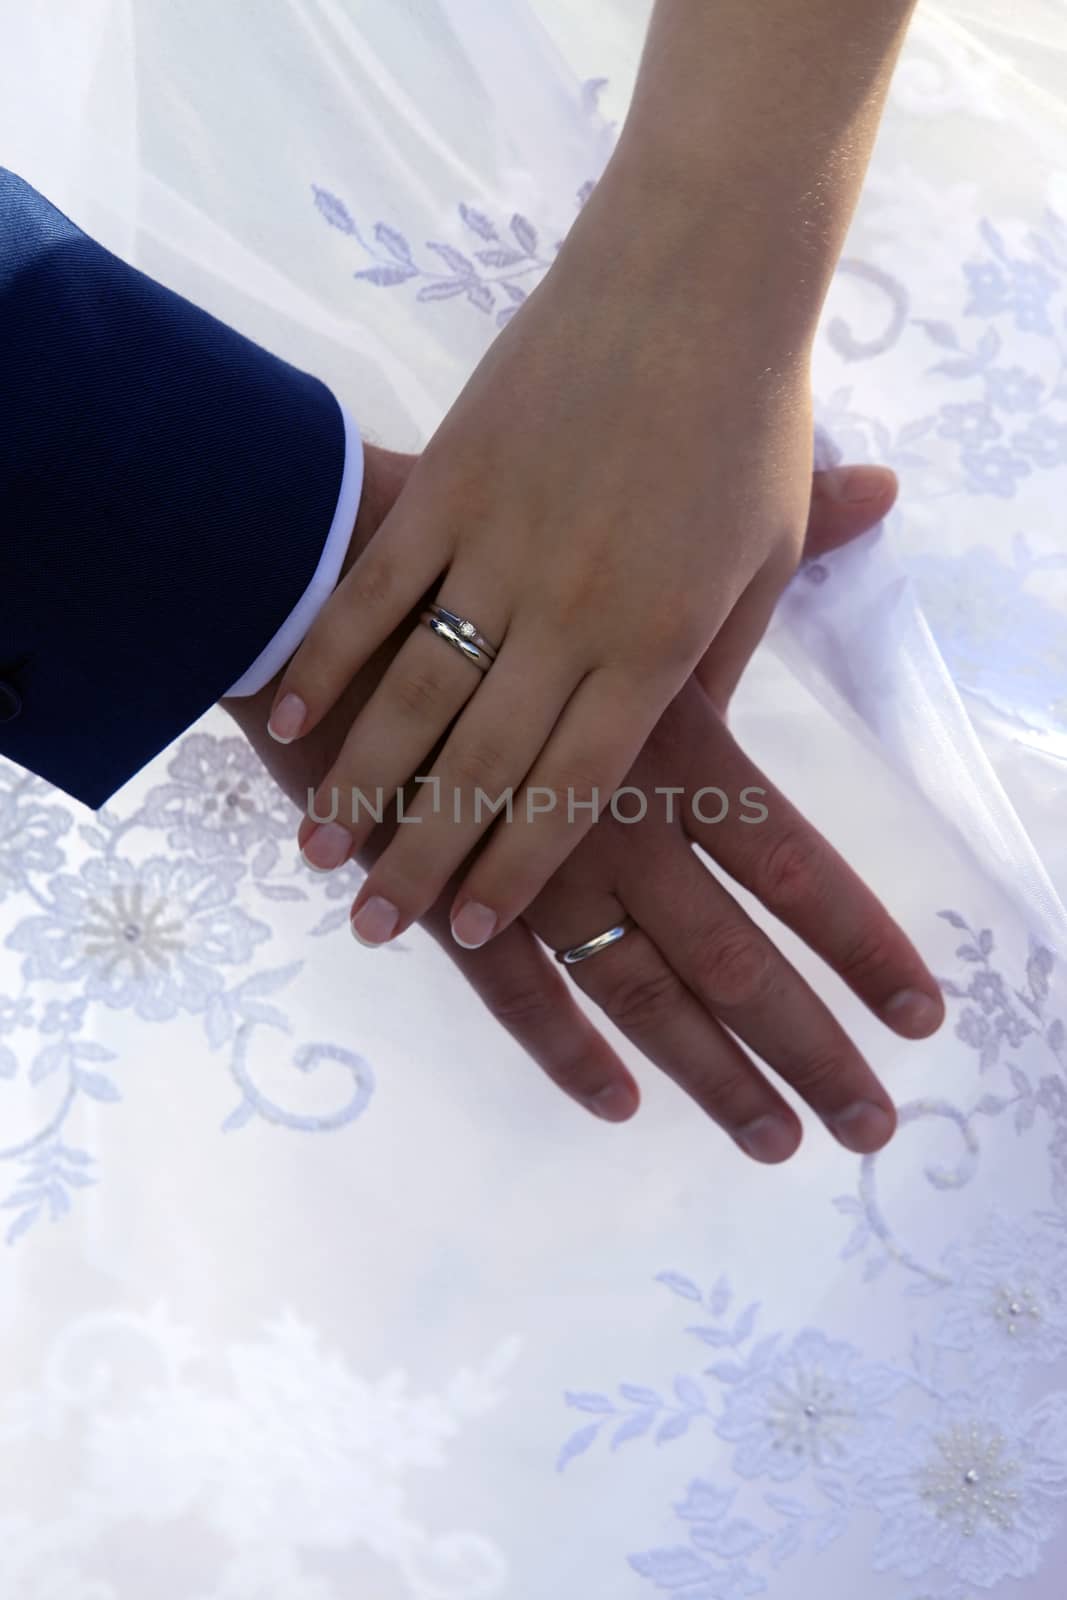 Hands of the bride and groom on the background of a wedding dress